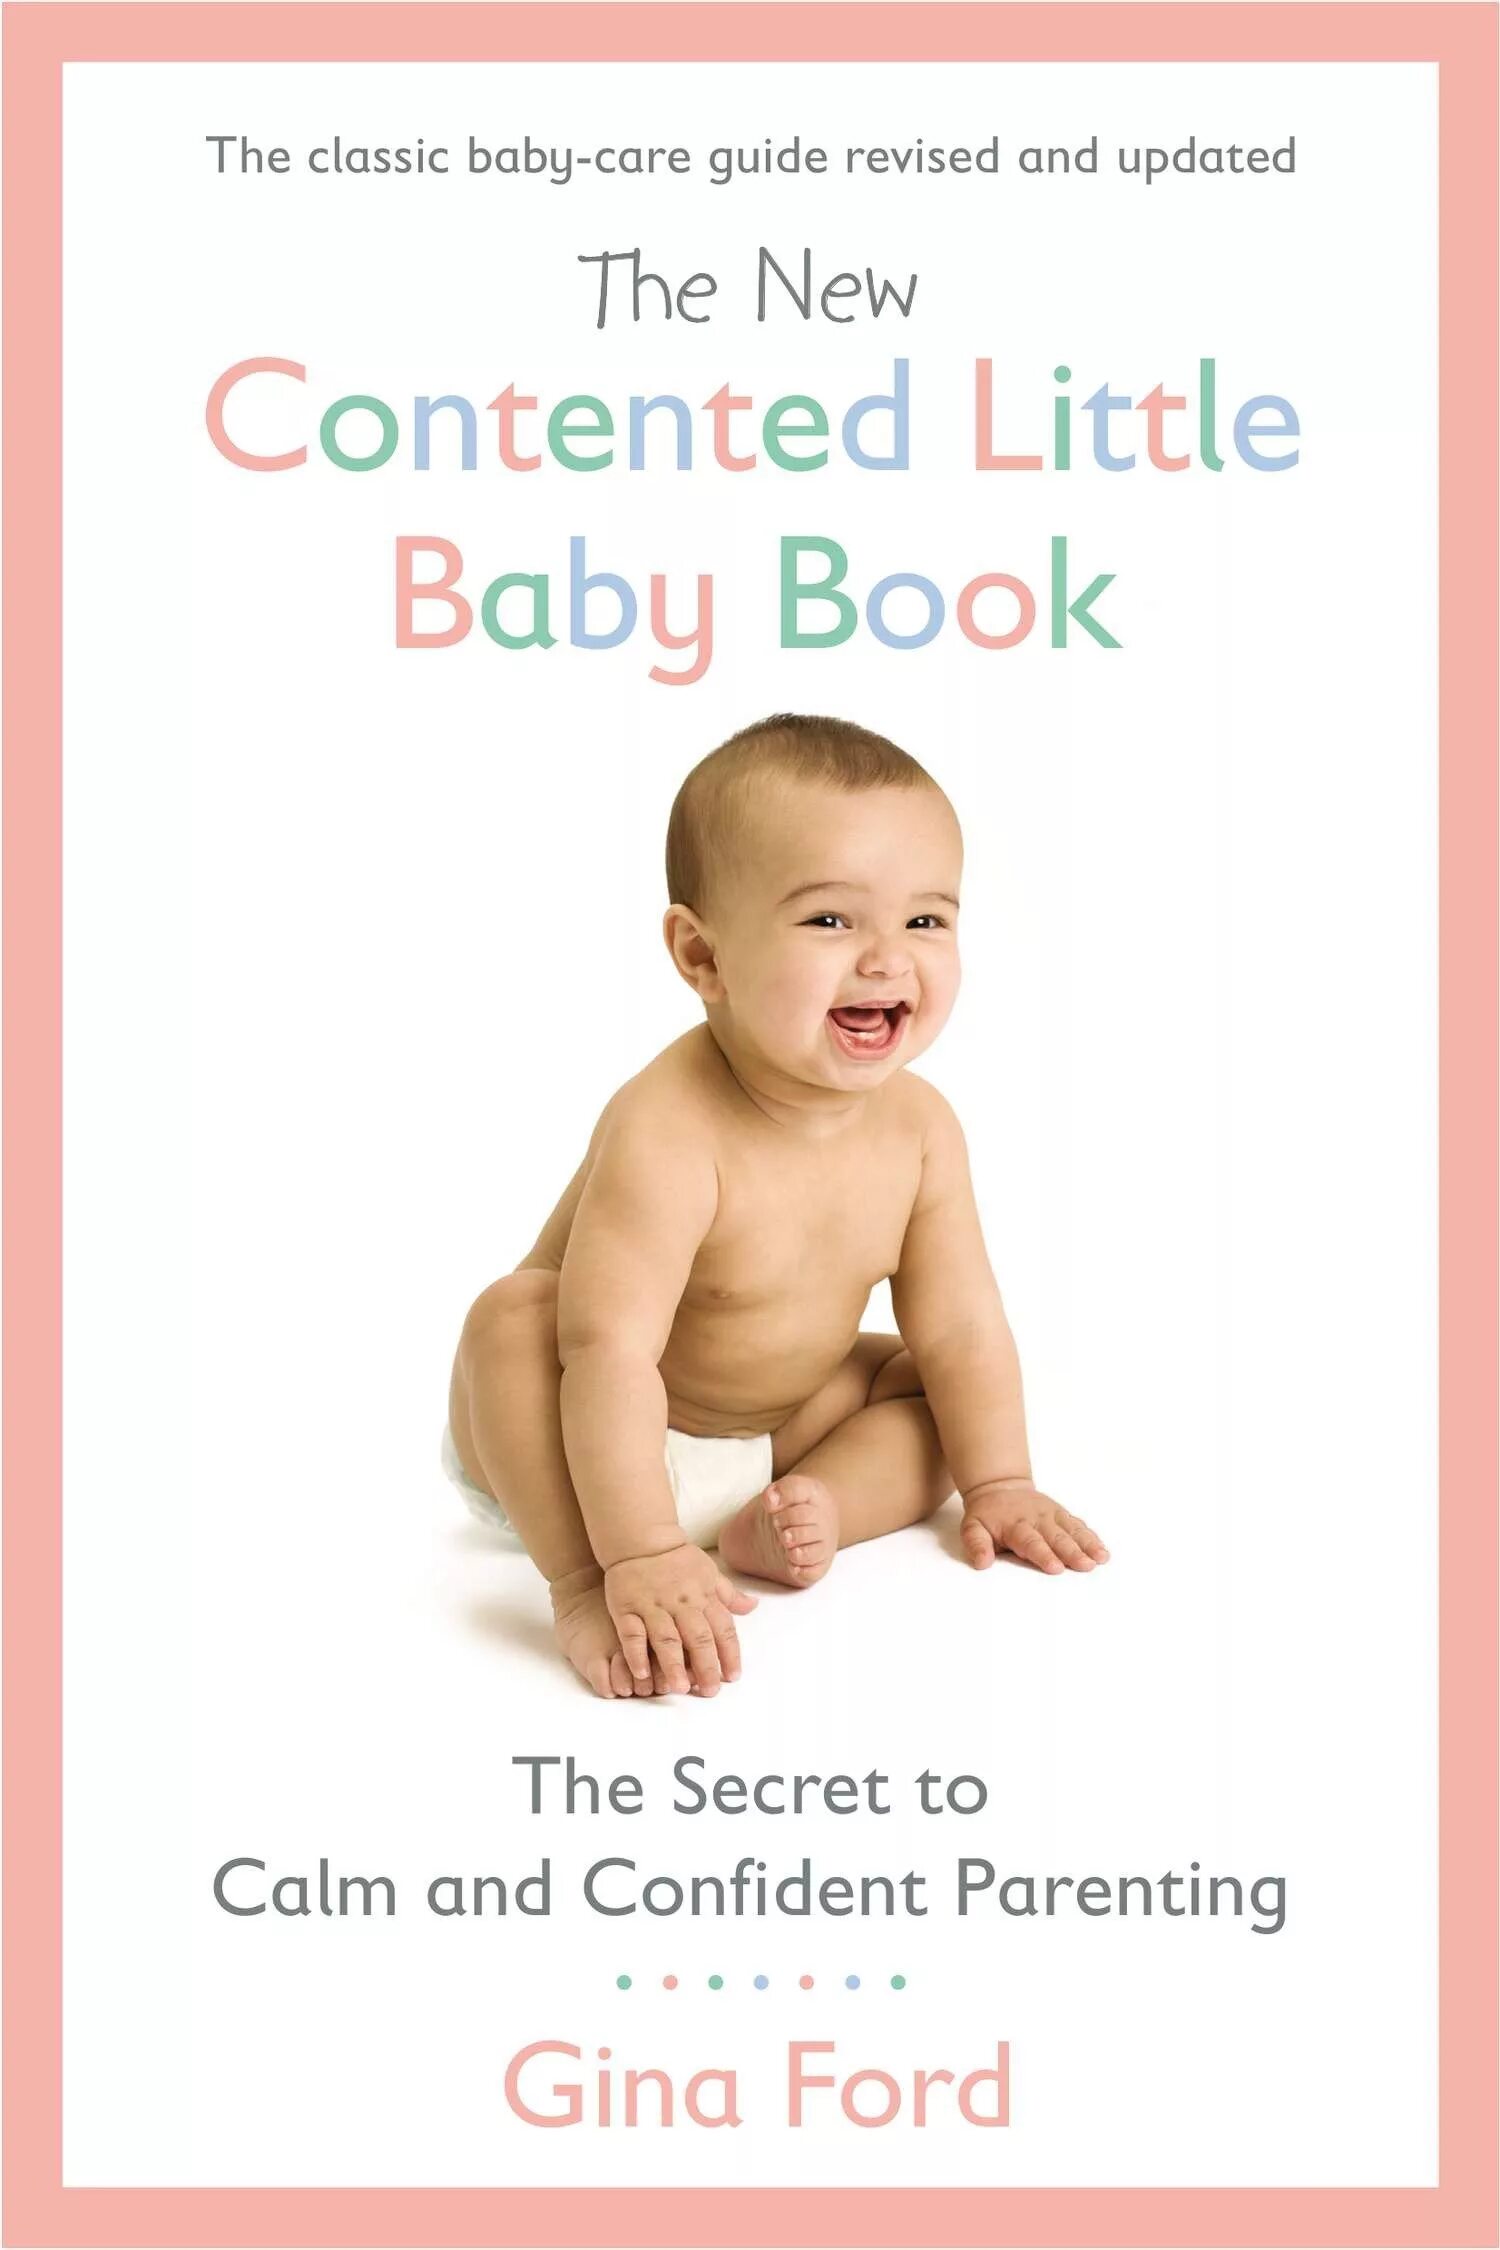 Baby book. The little book of Calm. Jina Ford little contented Baby. Fine little Baby. Less content